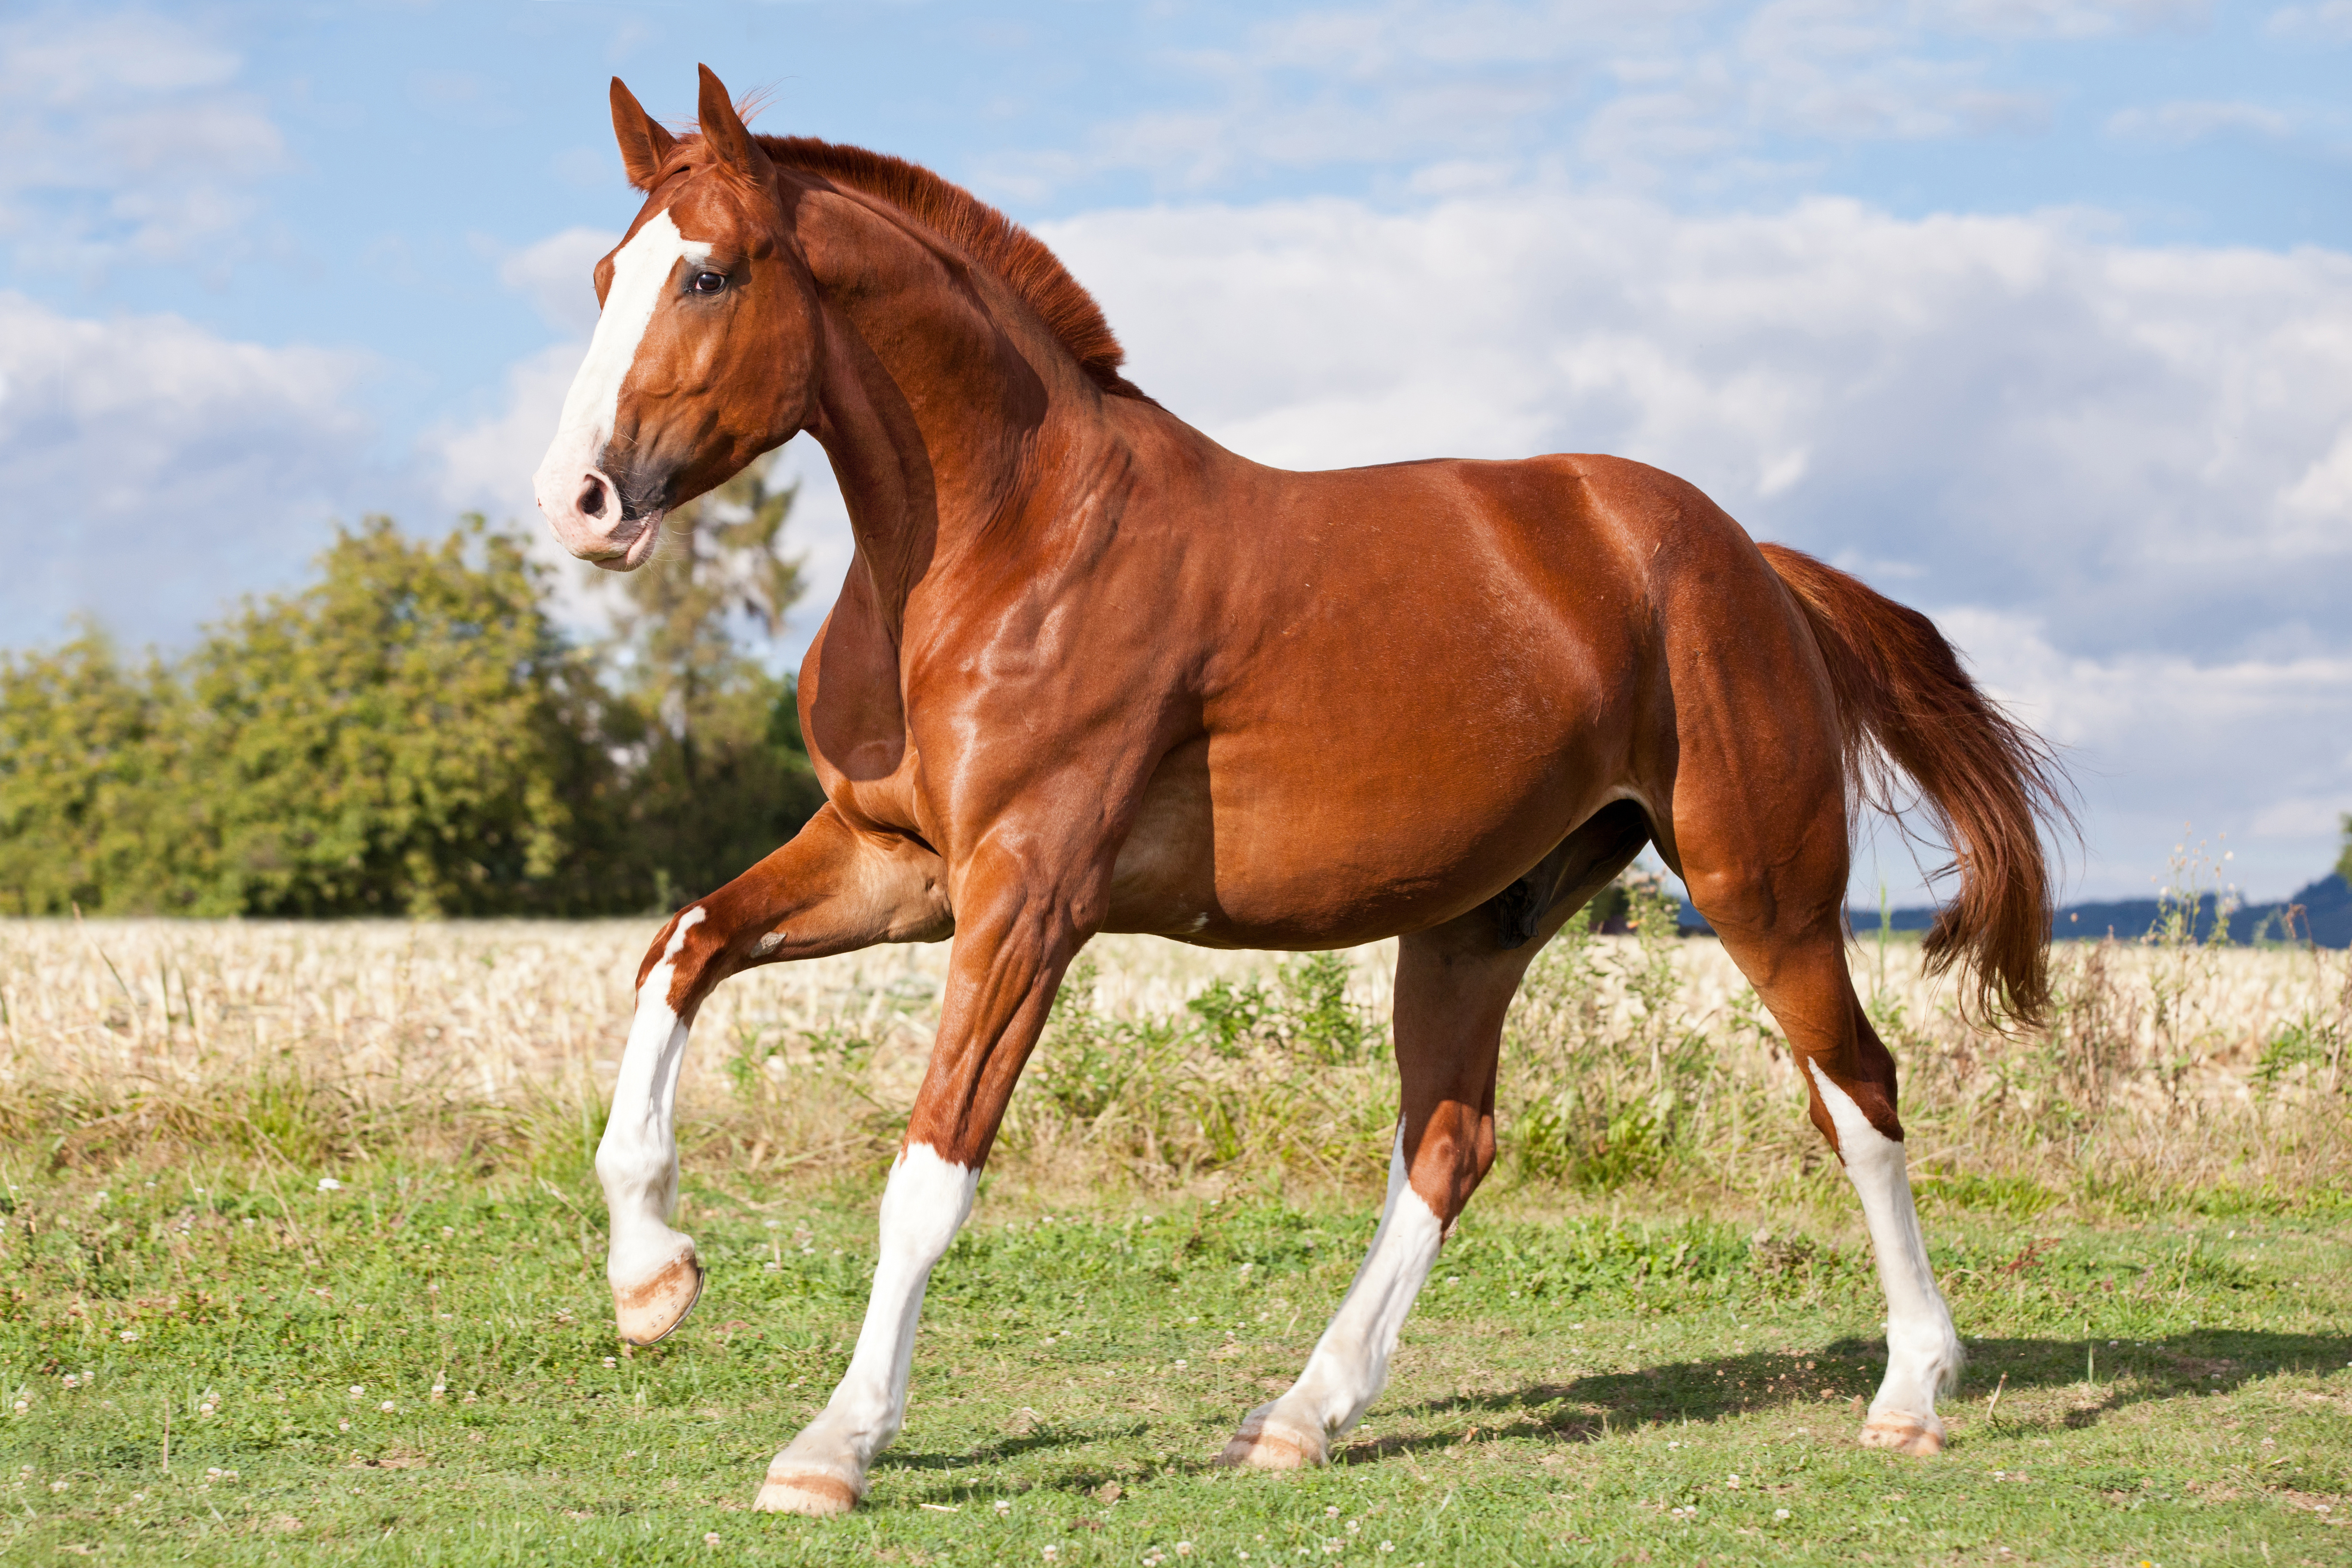 A chestnut horse with four white legs and a white blaze.
